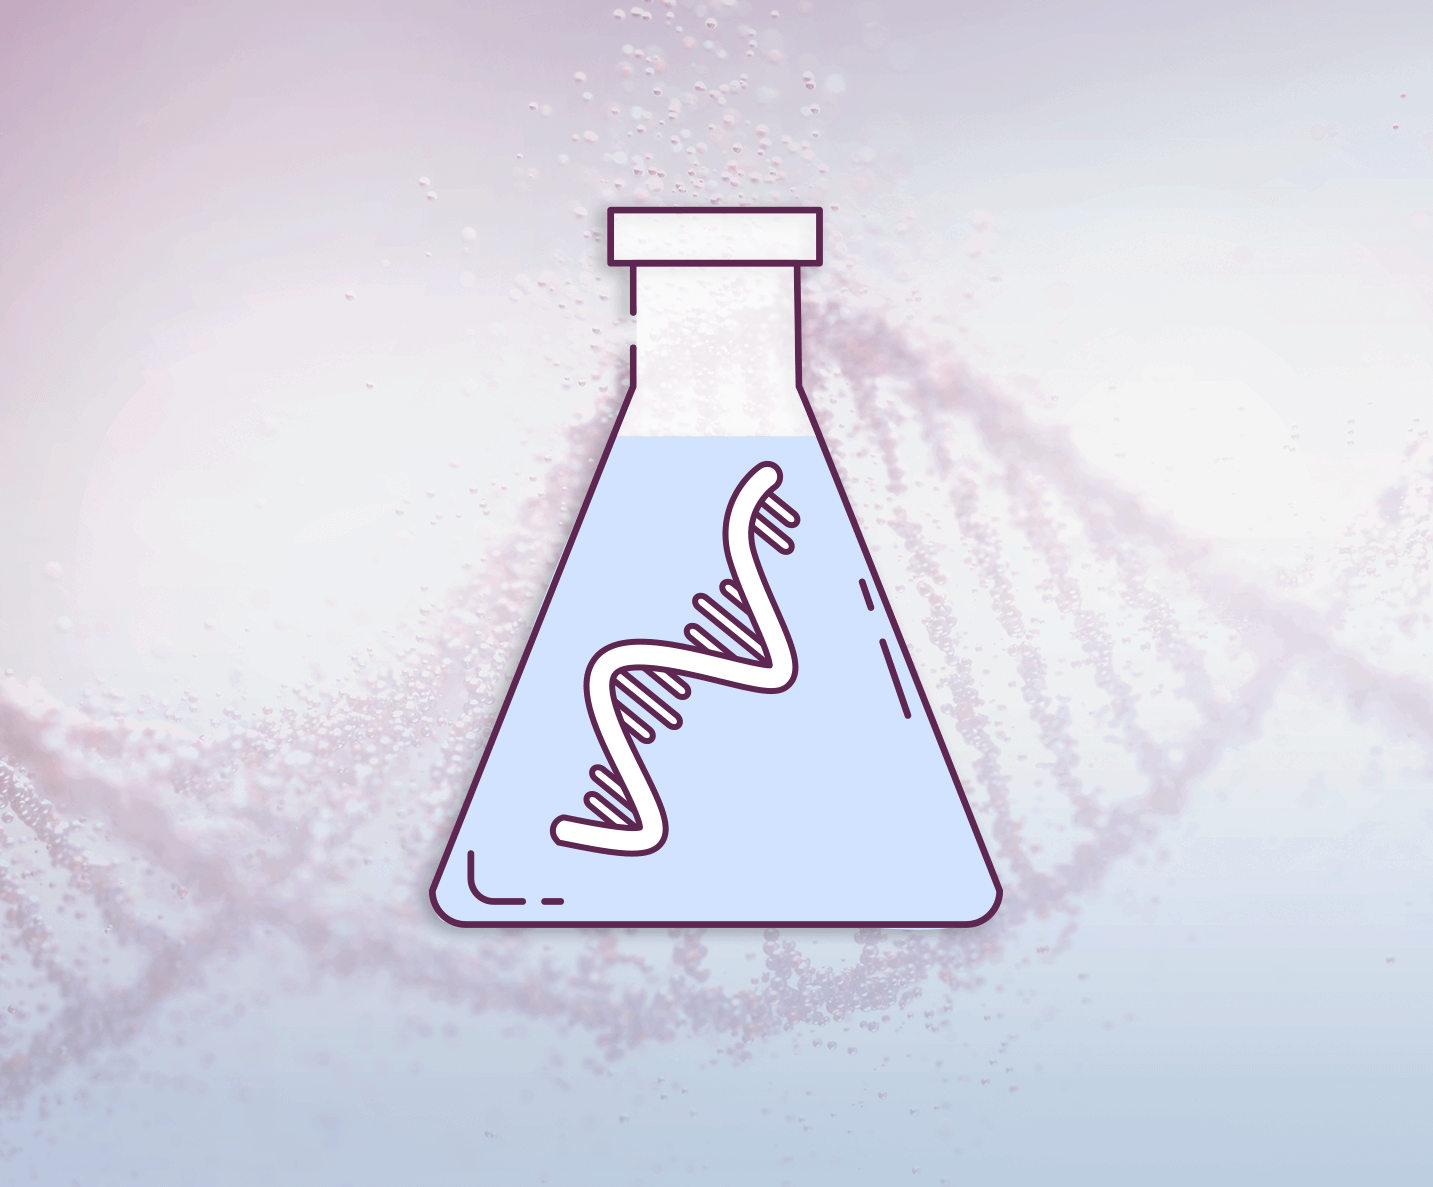 Image of a flask with single-stranded DNA inside.